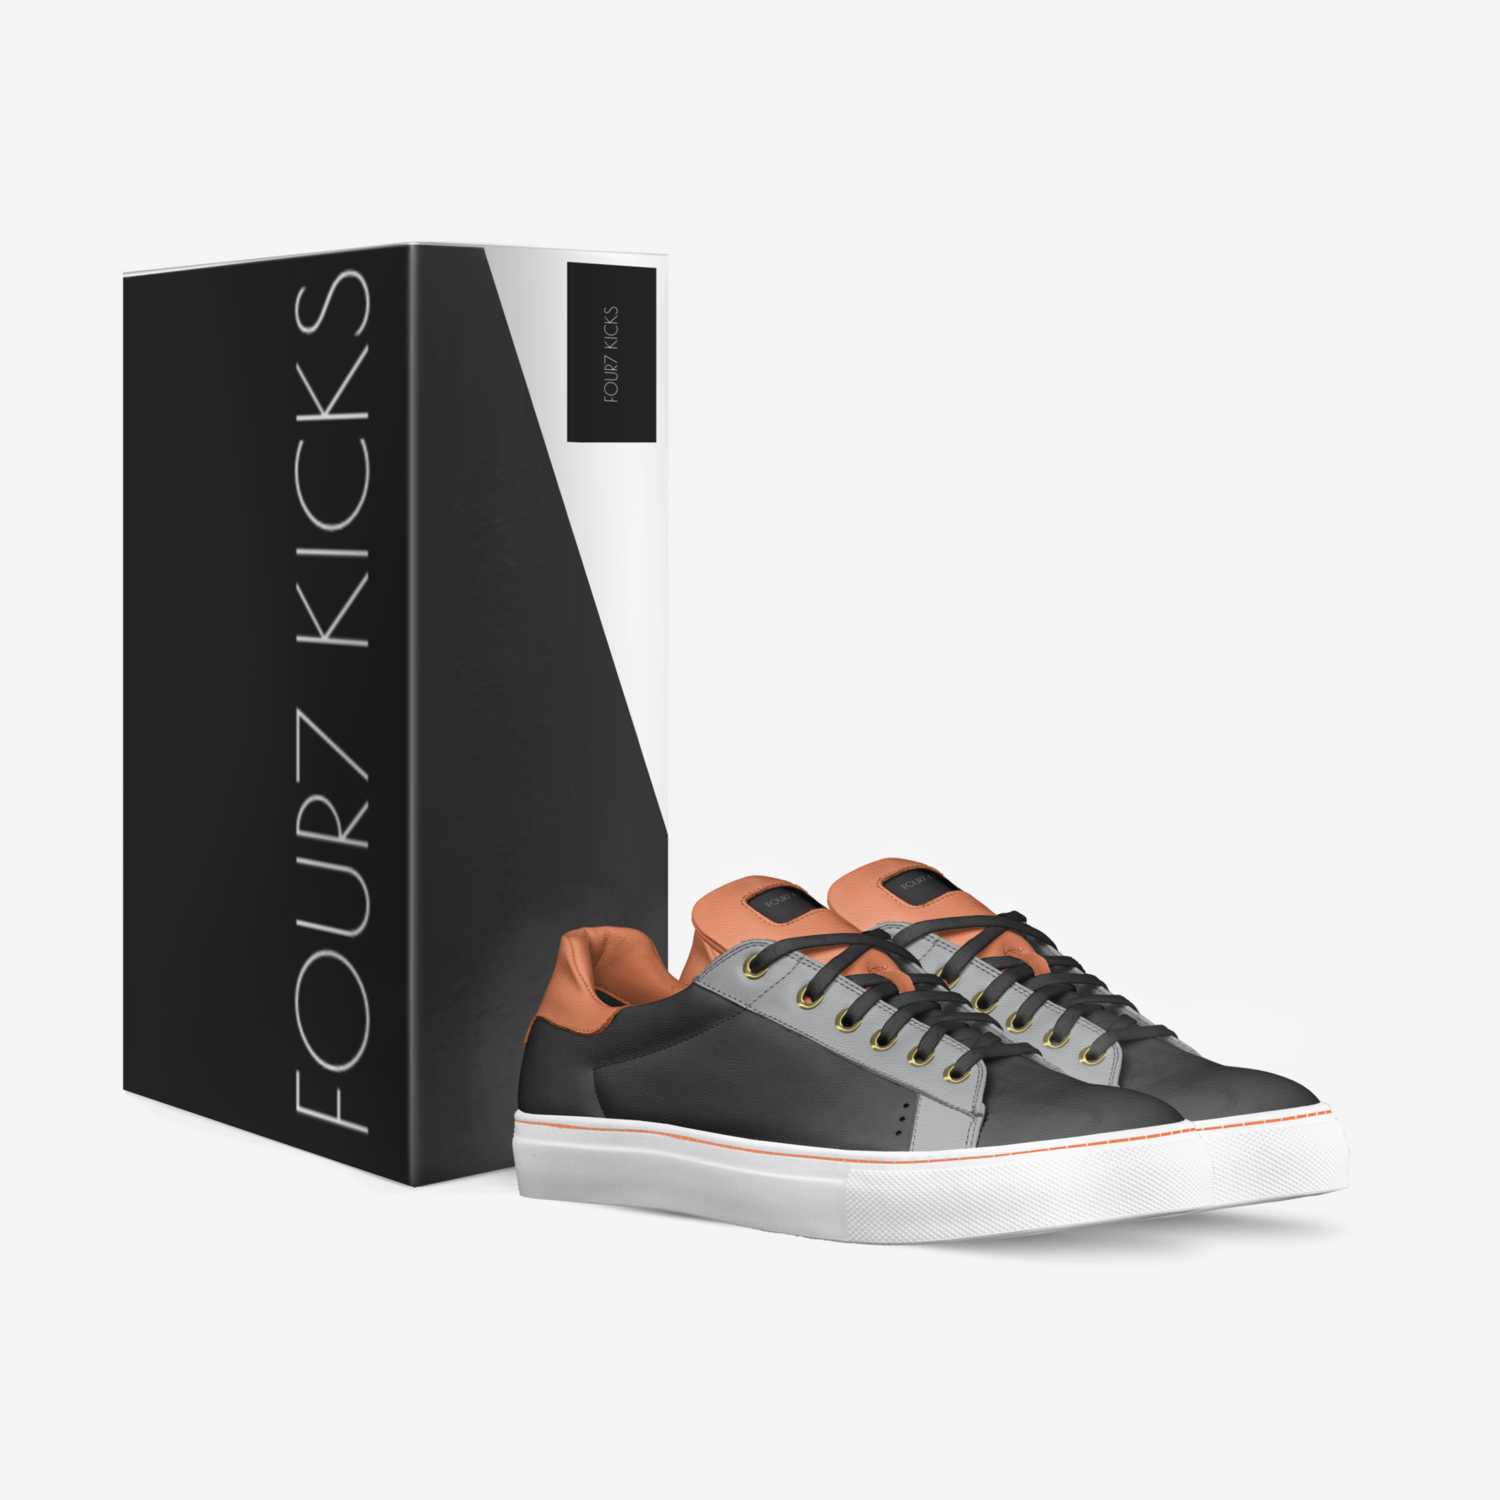 Four7 Kicks custom made in Italy shoes by Liam Stultz | Box view